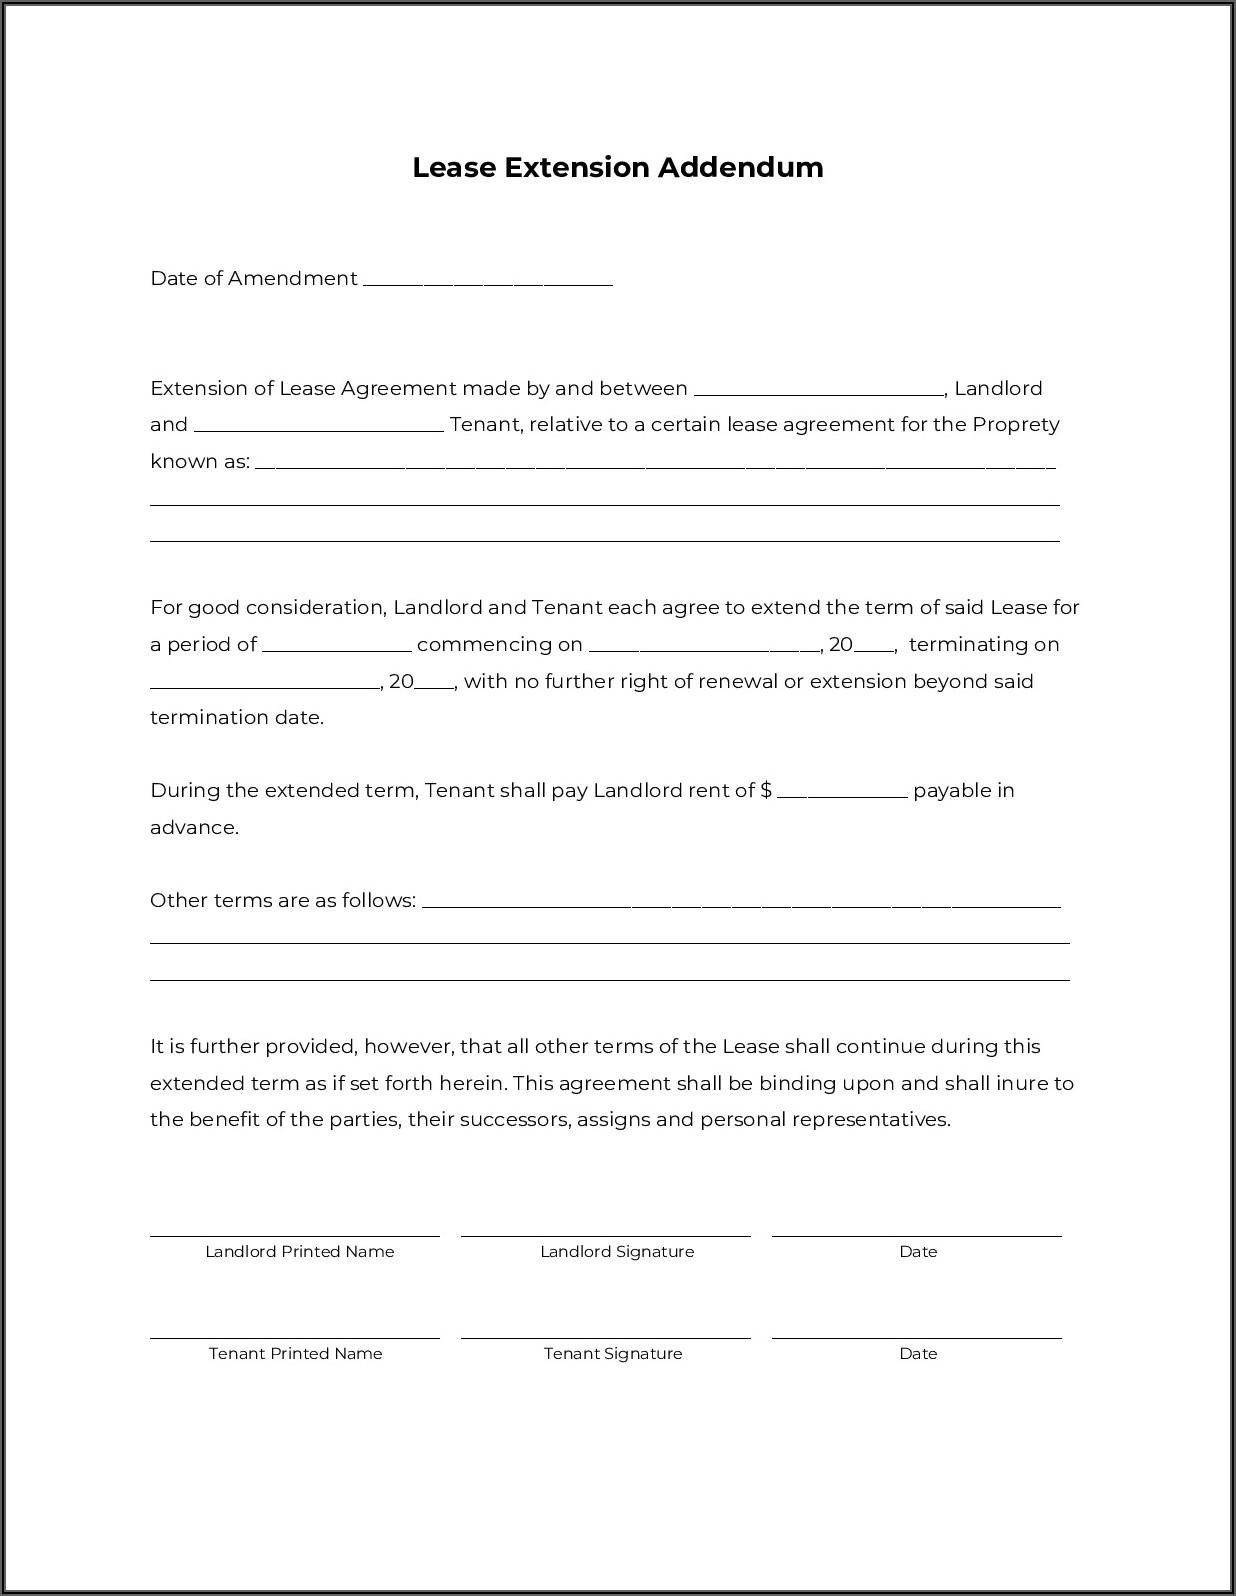 Florida Real Estate Contract Extension Form